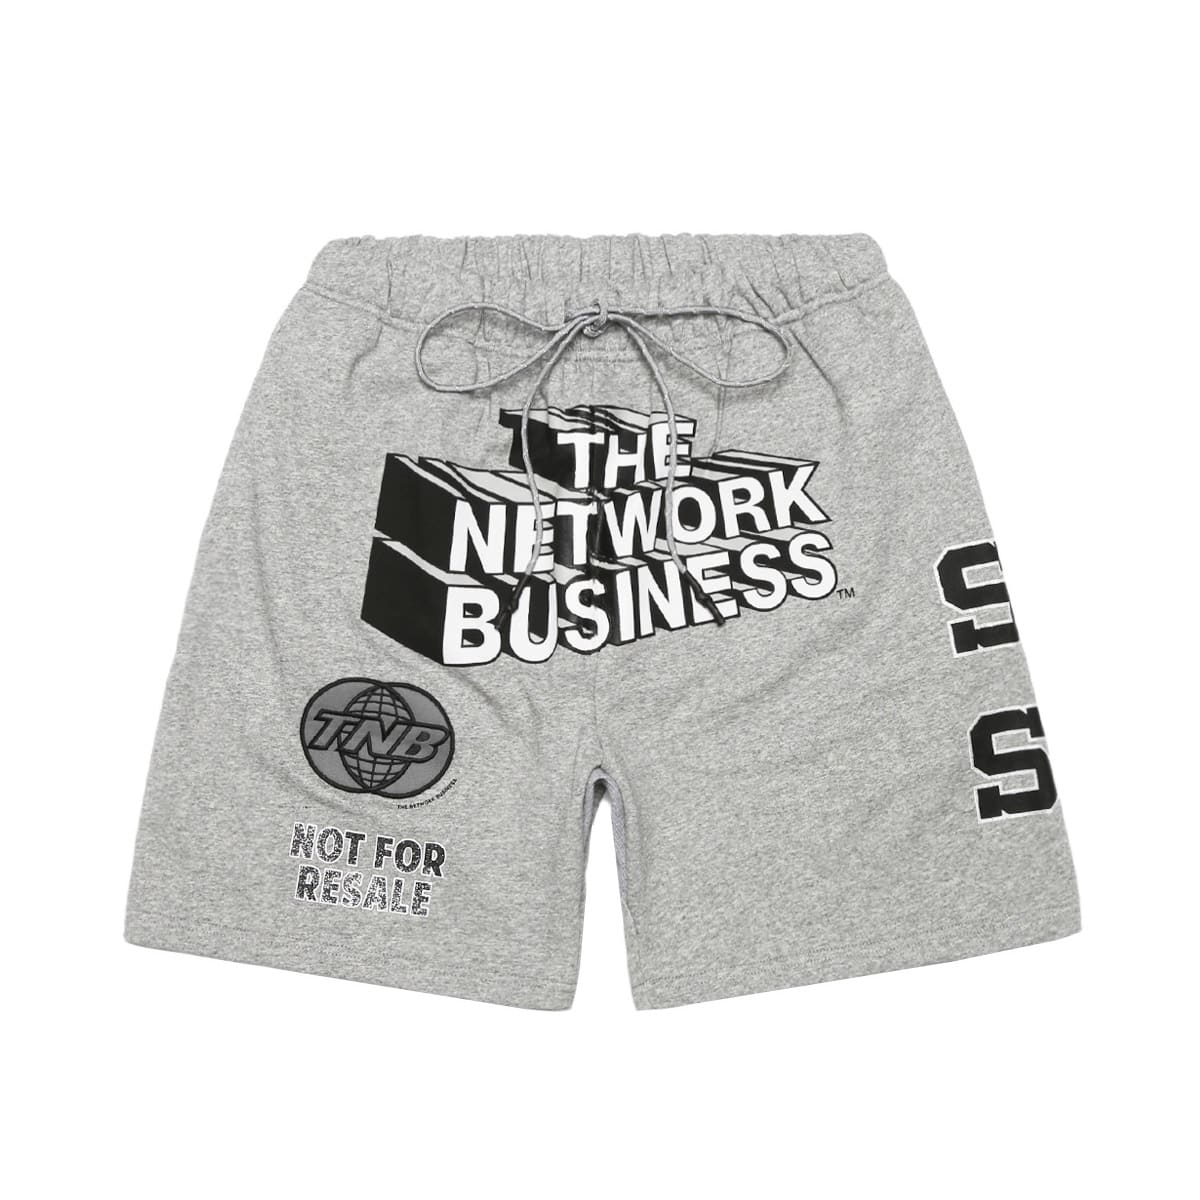 THE NETWORK BUSINESS Sweat Short Pants グレー 21SP-I_photo_large